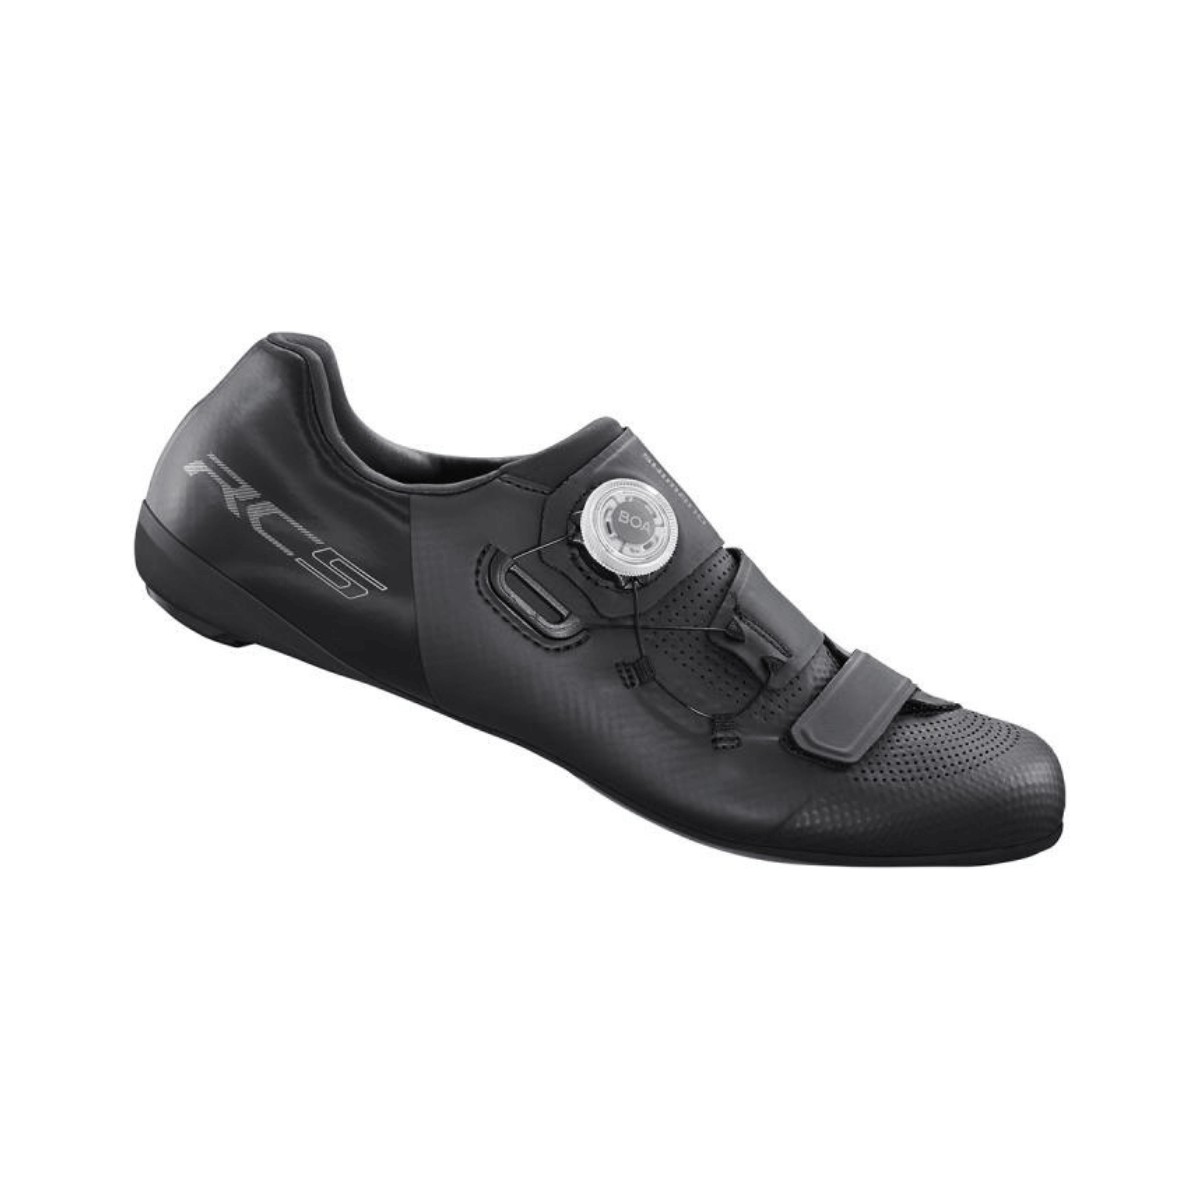 Chaussures Shimano RC502 Noir